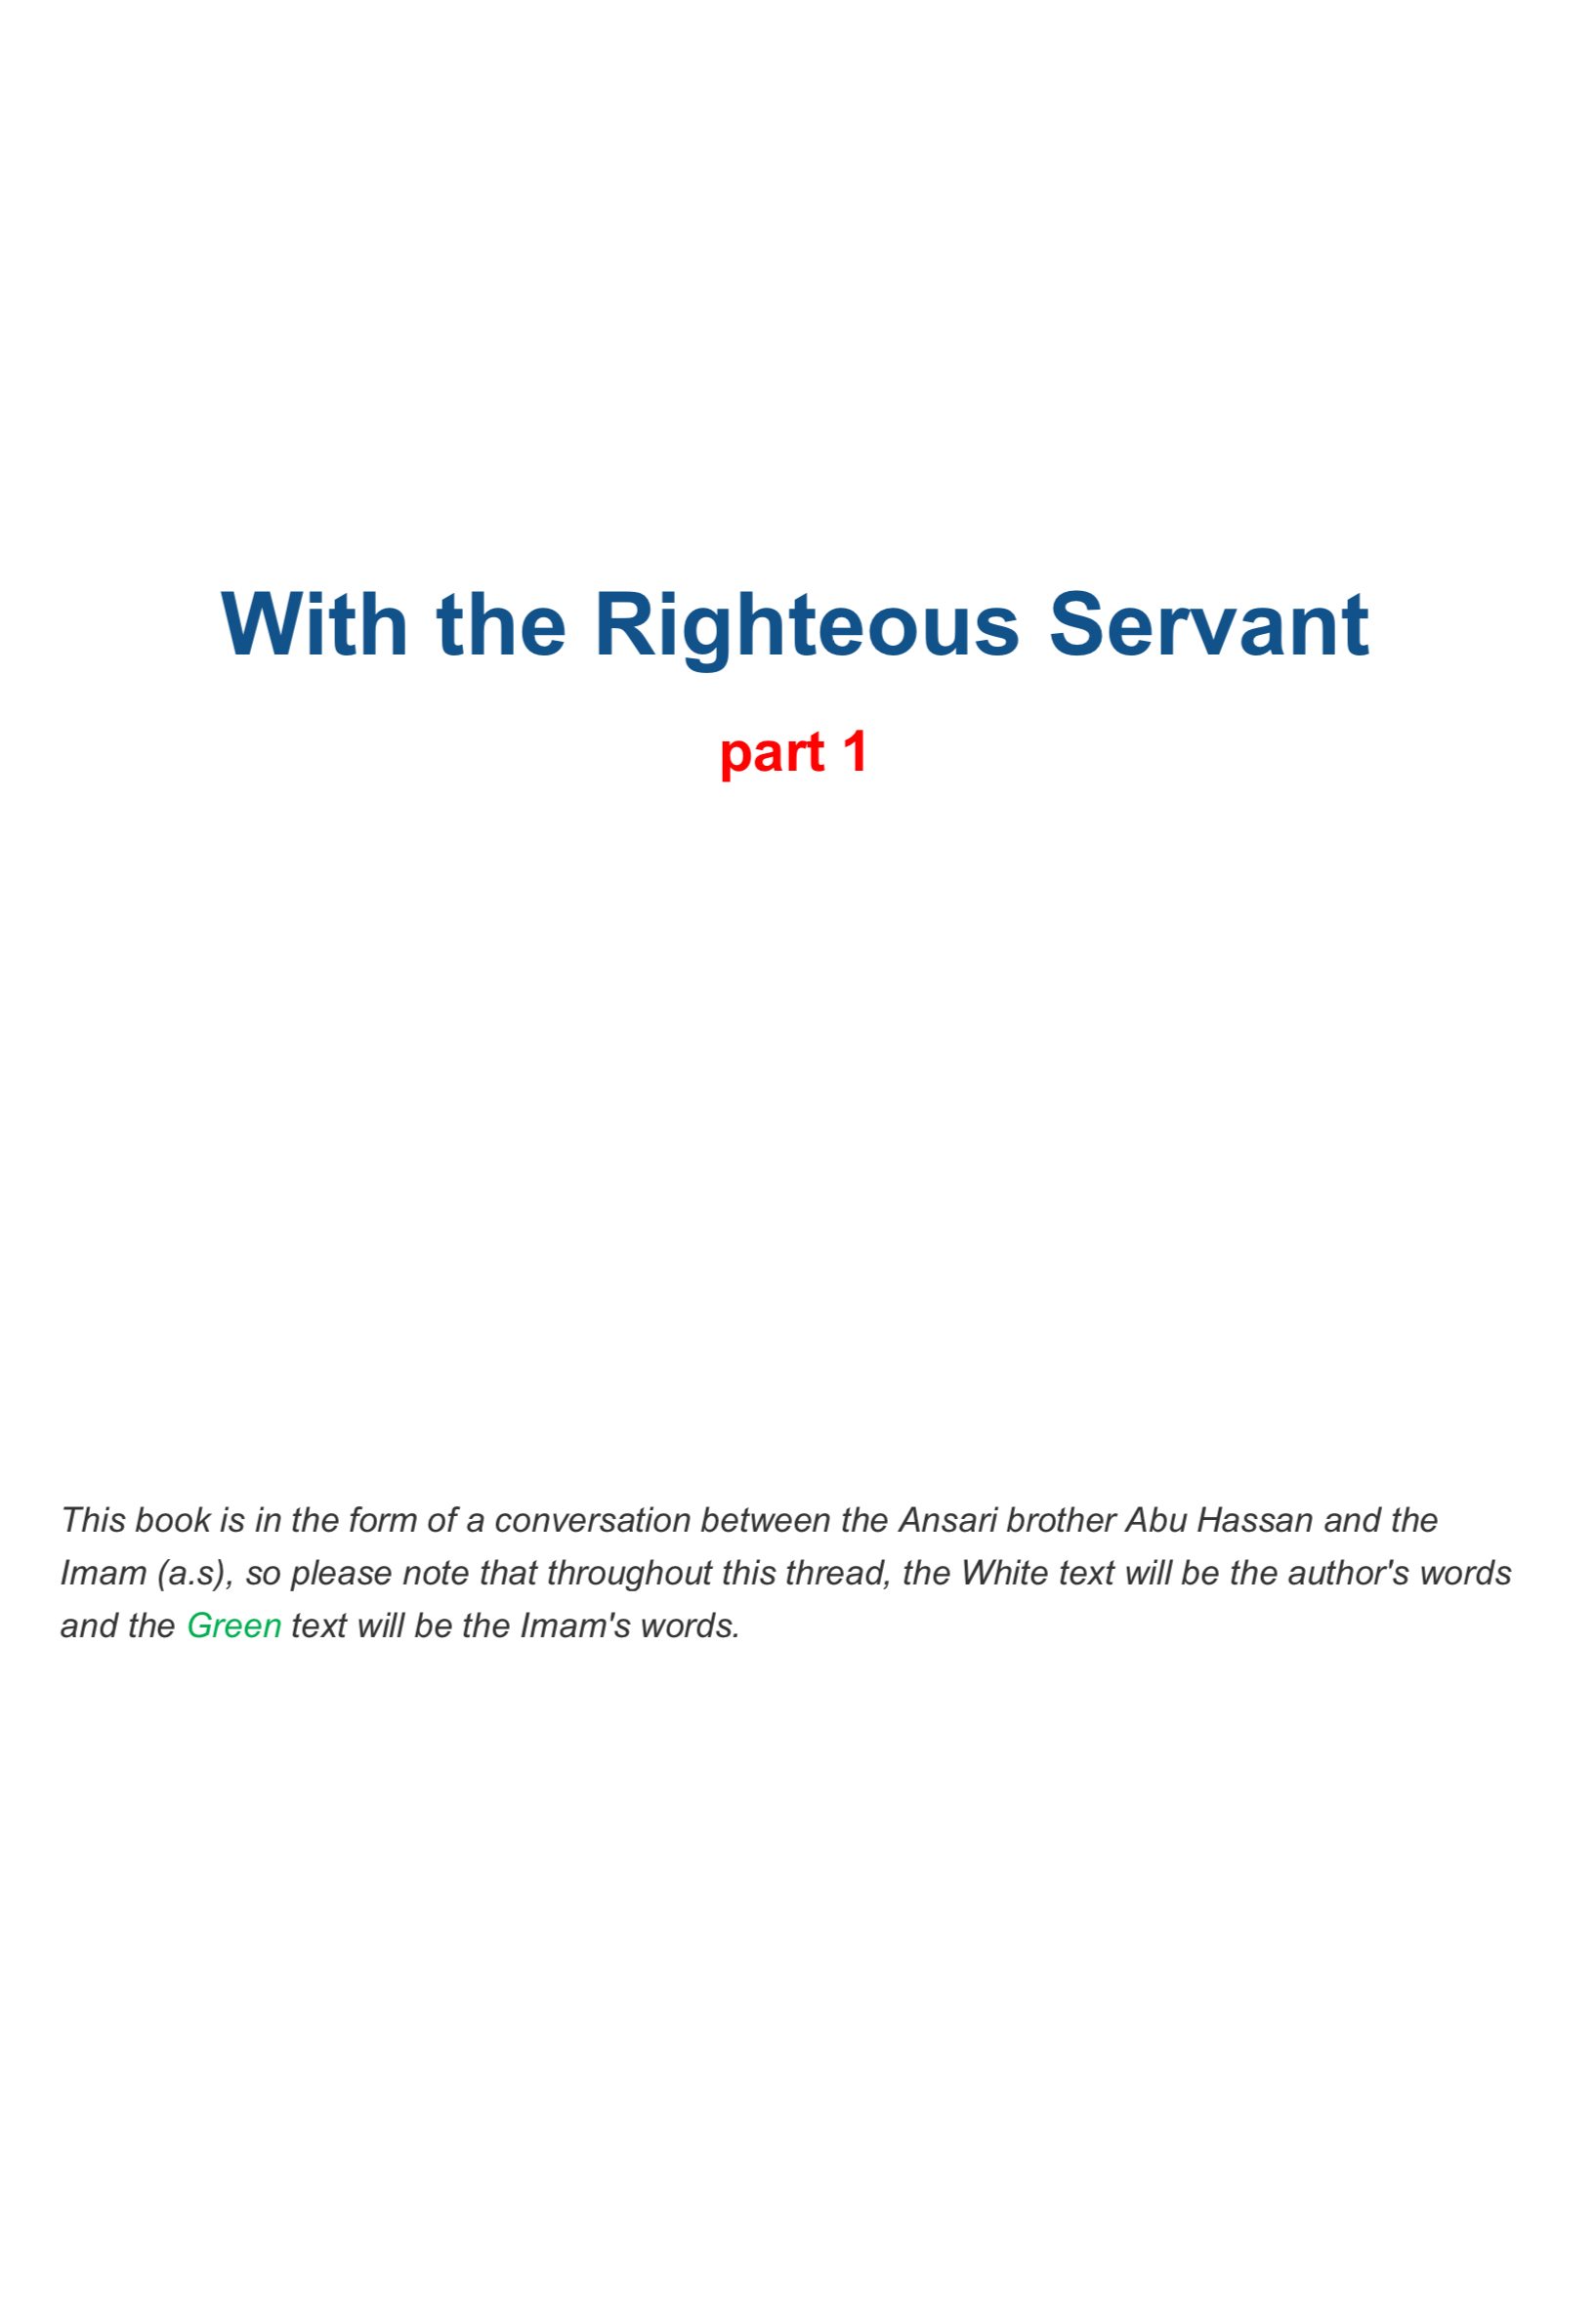 With the Righteous Servant part 1